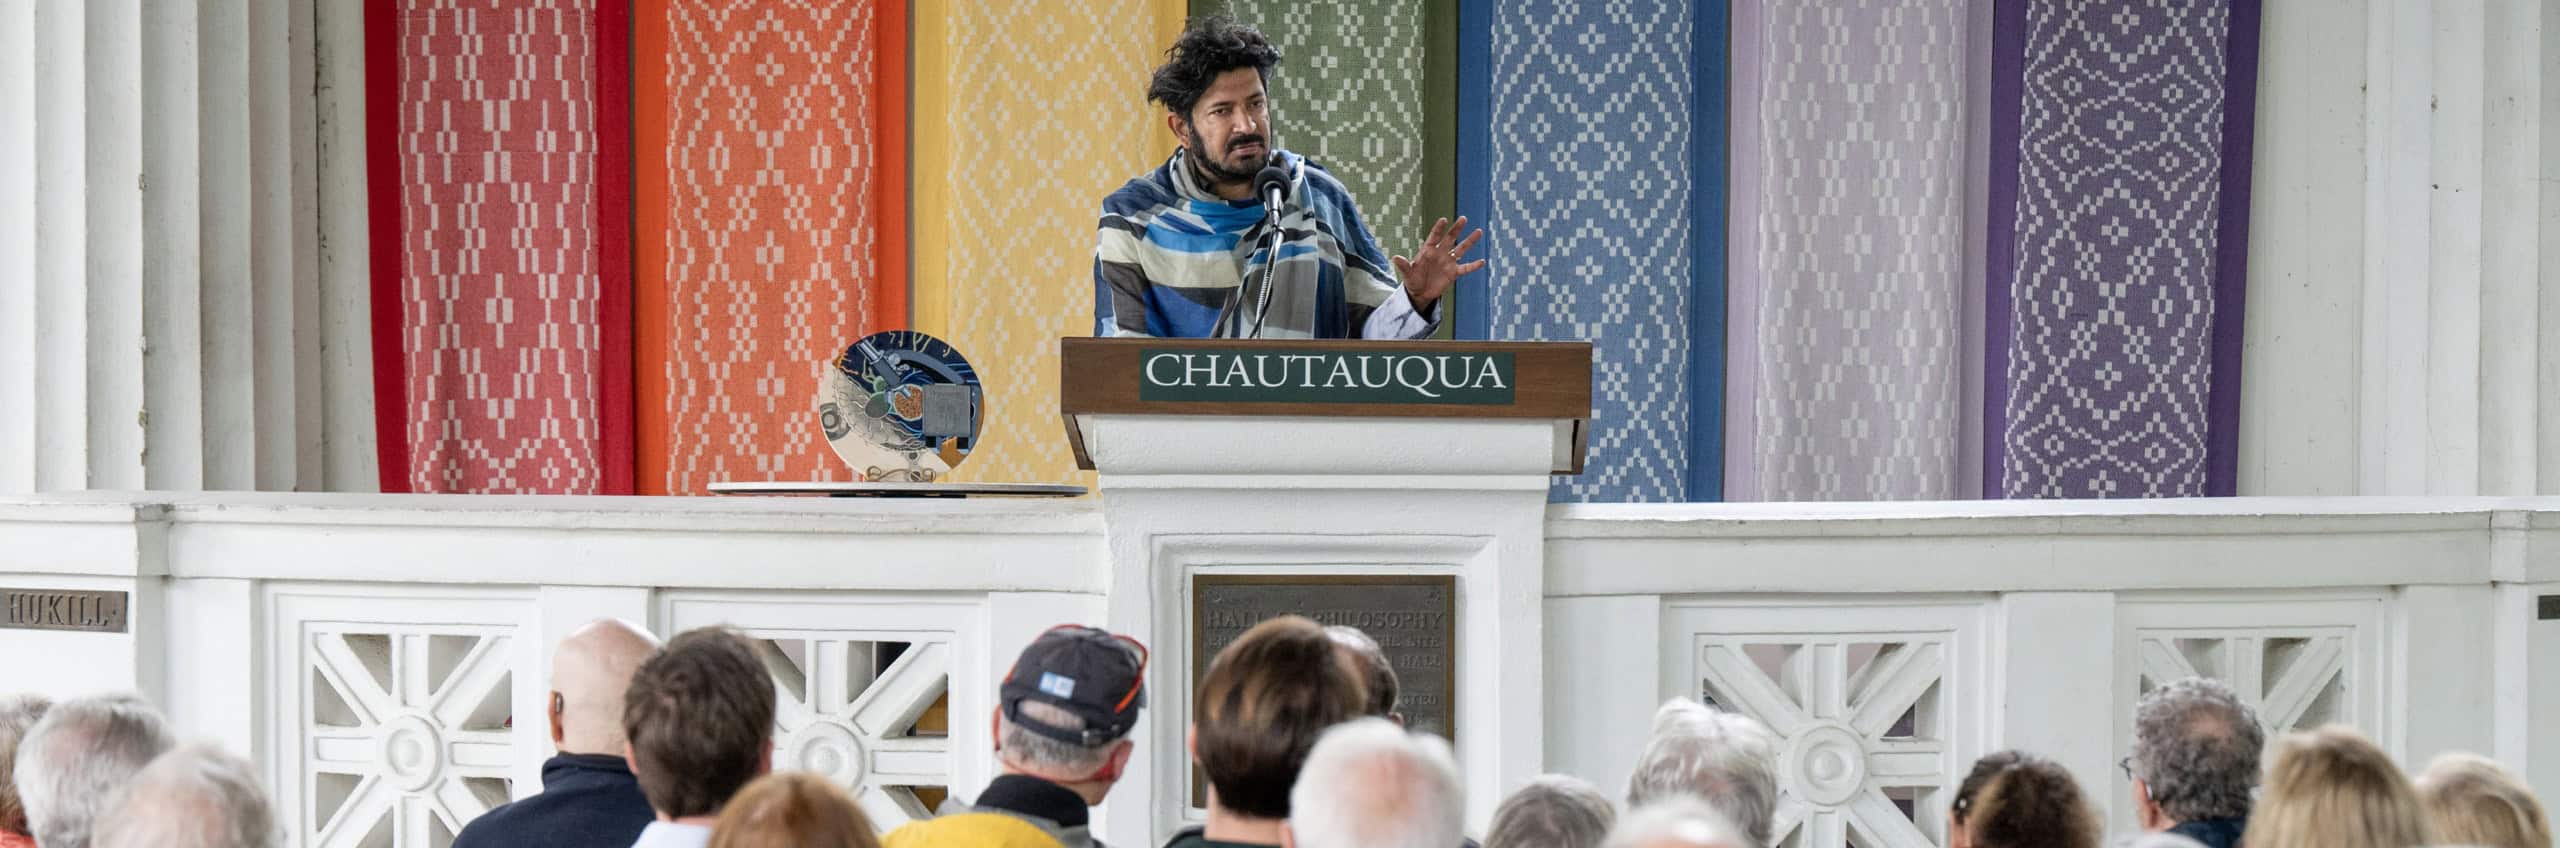 The 2023 Chautauqua Prize winner speaking to an audience in the Hall of Philosophy with the award next to them